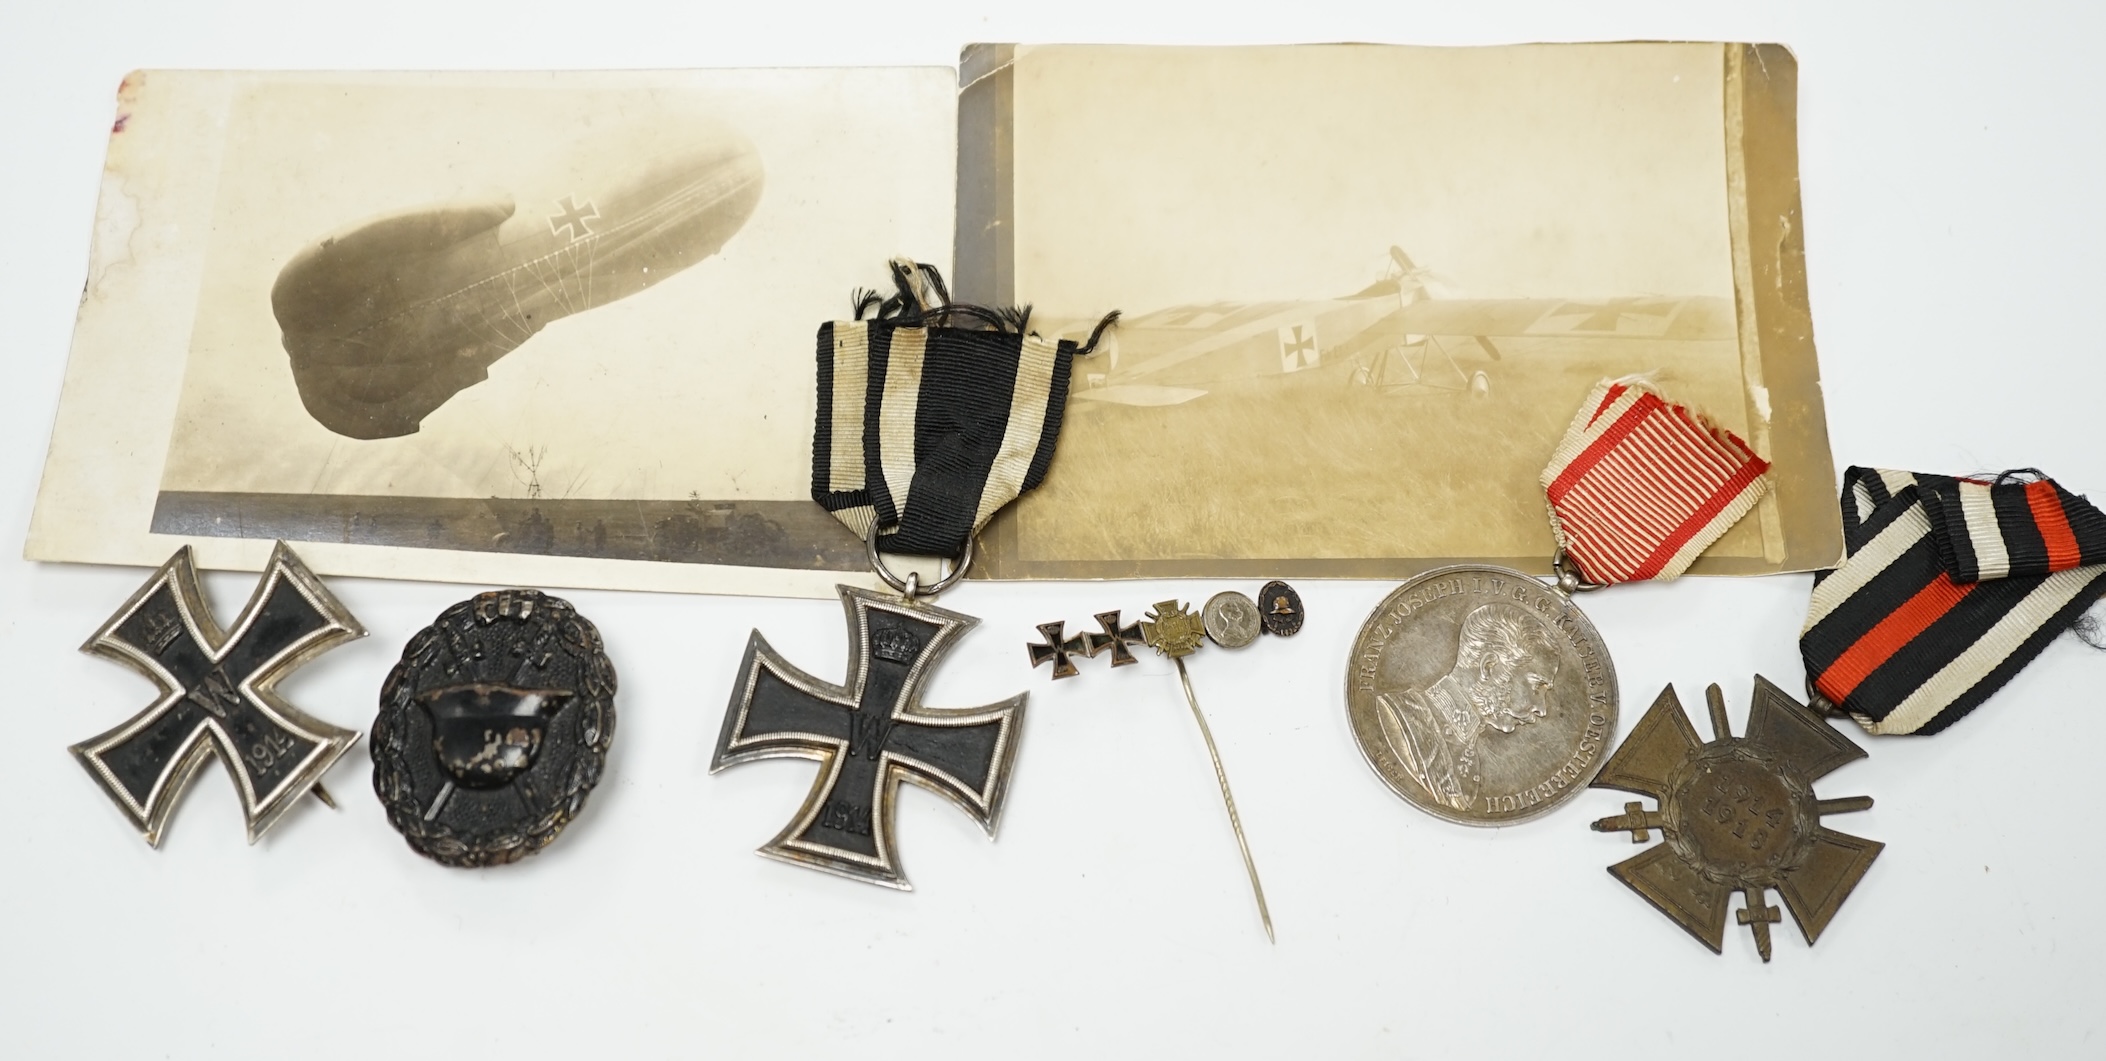 Four First World War German medals; a First Class Iron Cross, a 2nd Class Iron Cross, a 1914-1918 Honour Cross and an Austro-Hungarian Medal for Bravery, together with a wound badge and the related stick pin for the meda